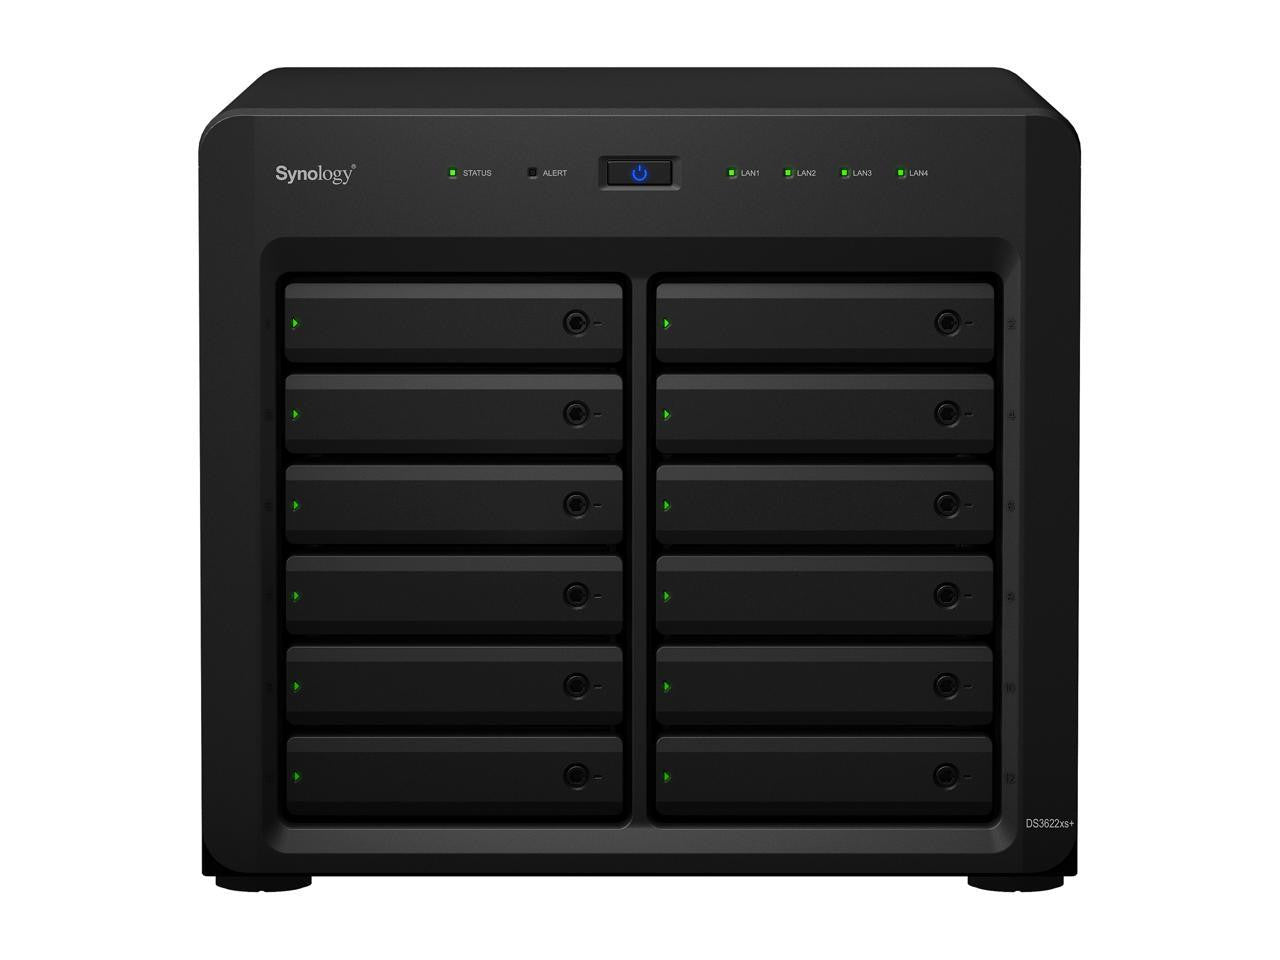 DS3622xs+ 12-BAY DiskStation with 16GB RAM and 96TB (12 x 8TB) of HAT5300 Synology Enterprise Drives